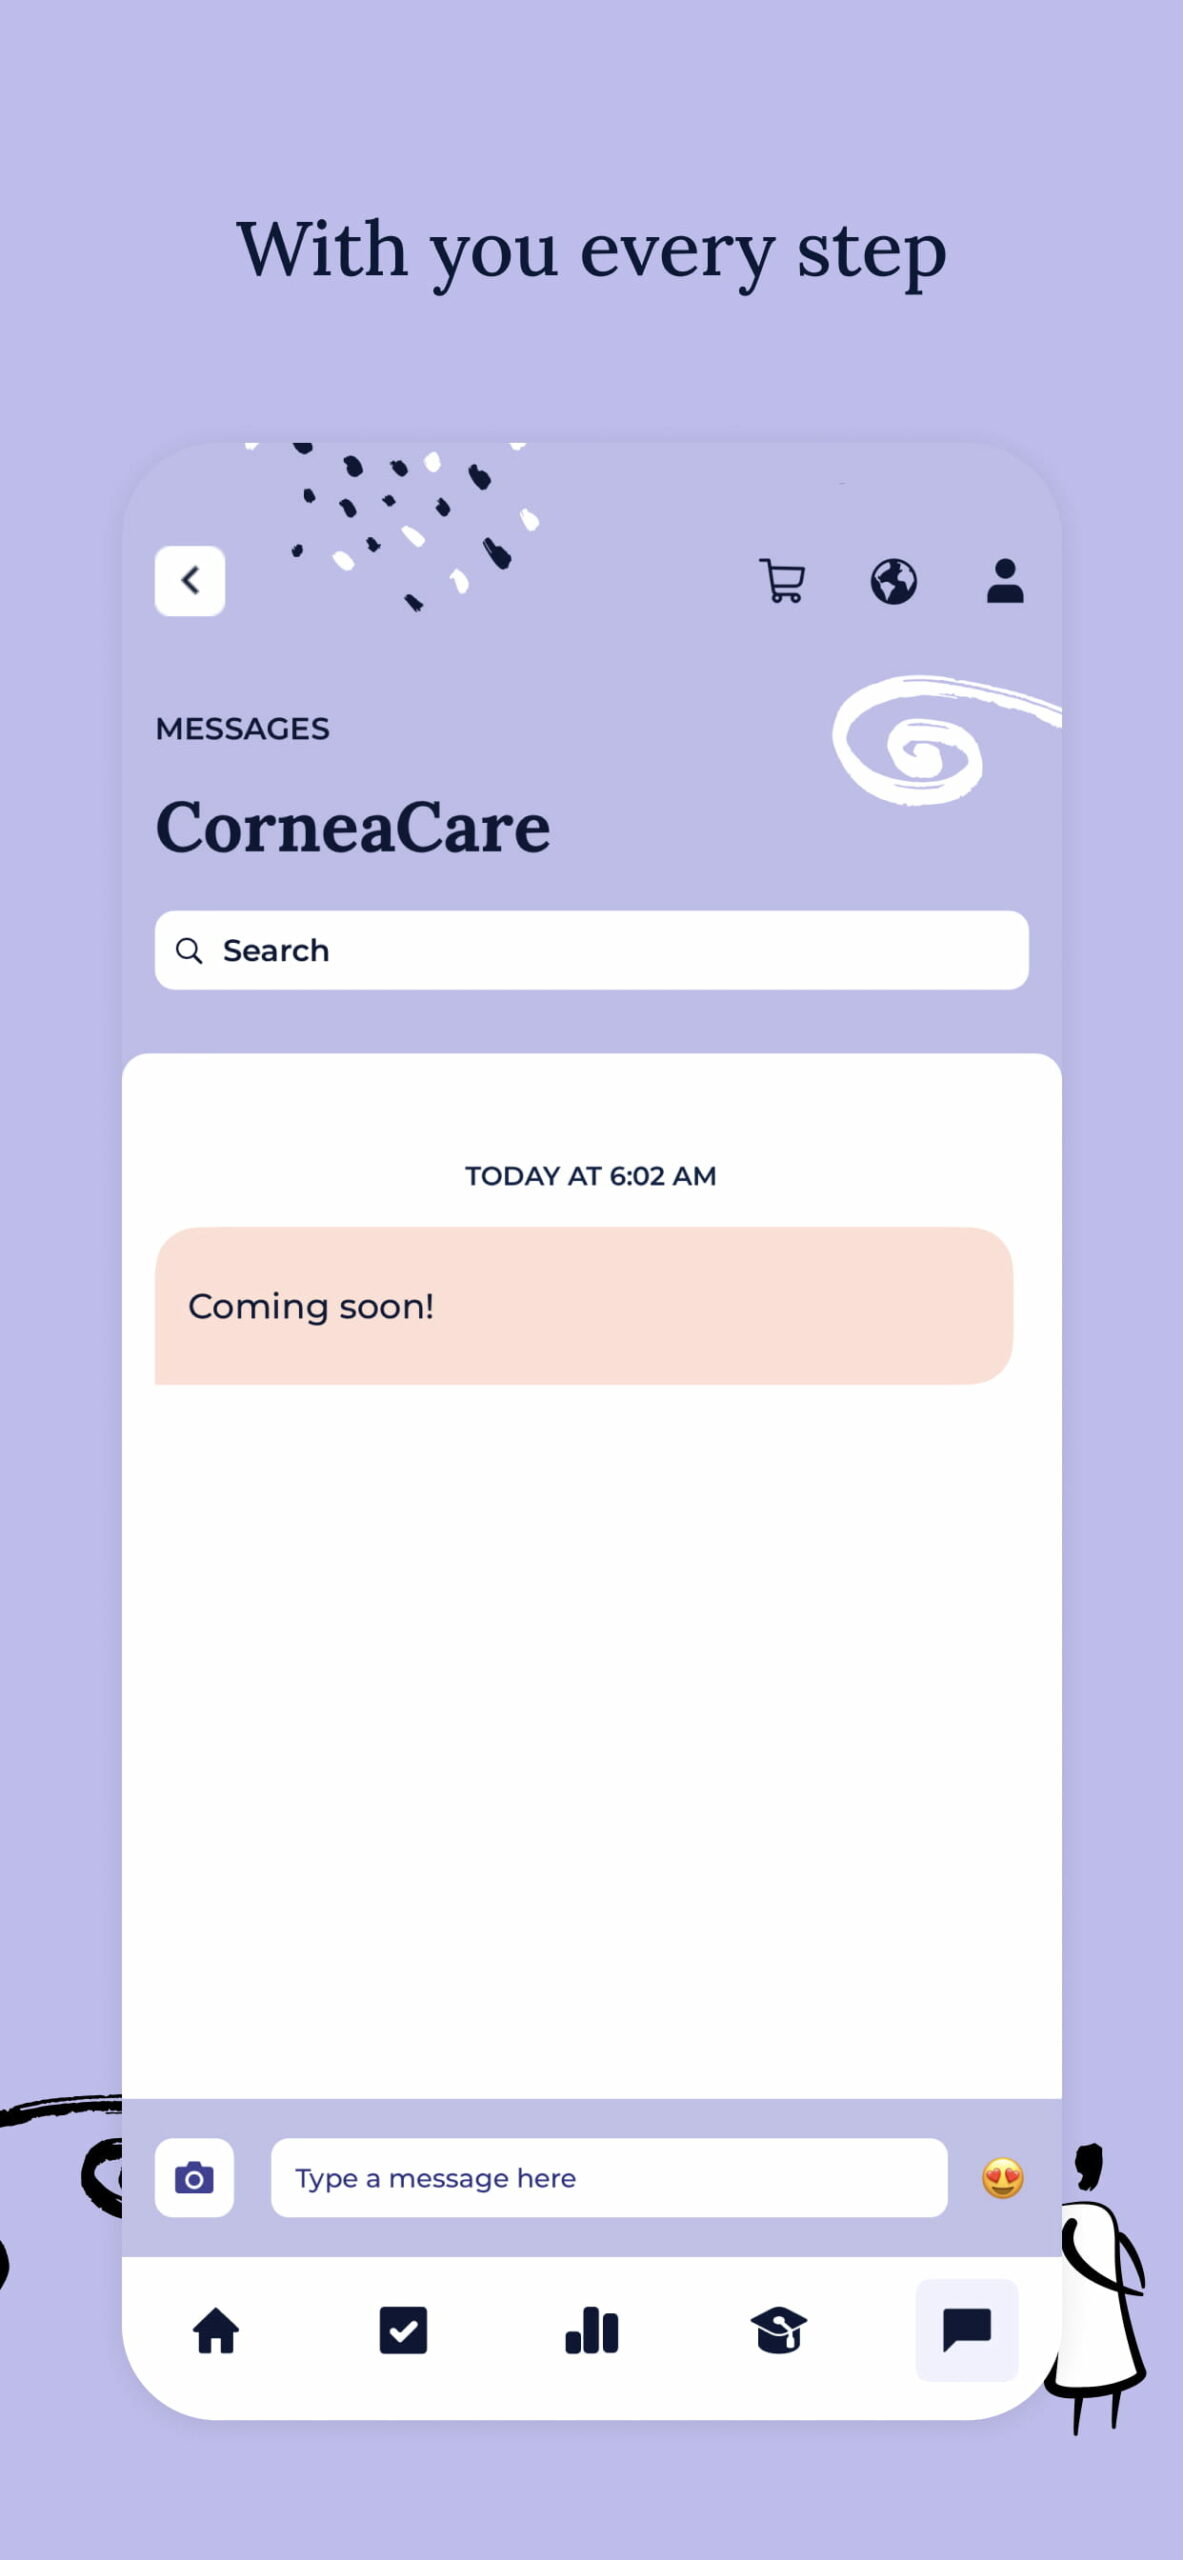 corneacare-app-with-you-every-step-scaled.jpg